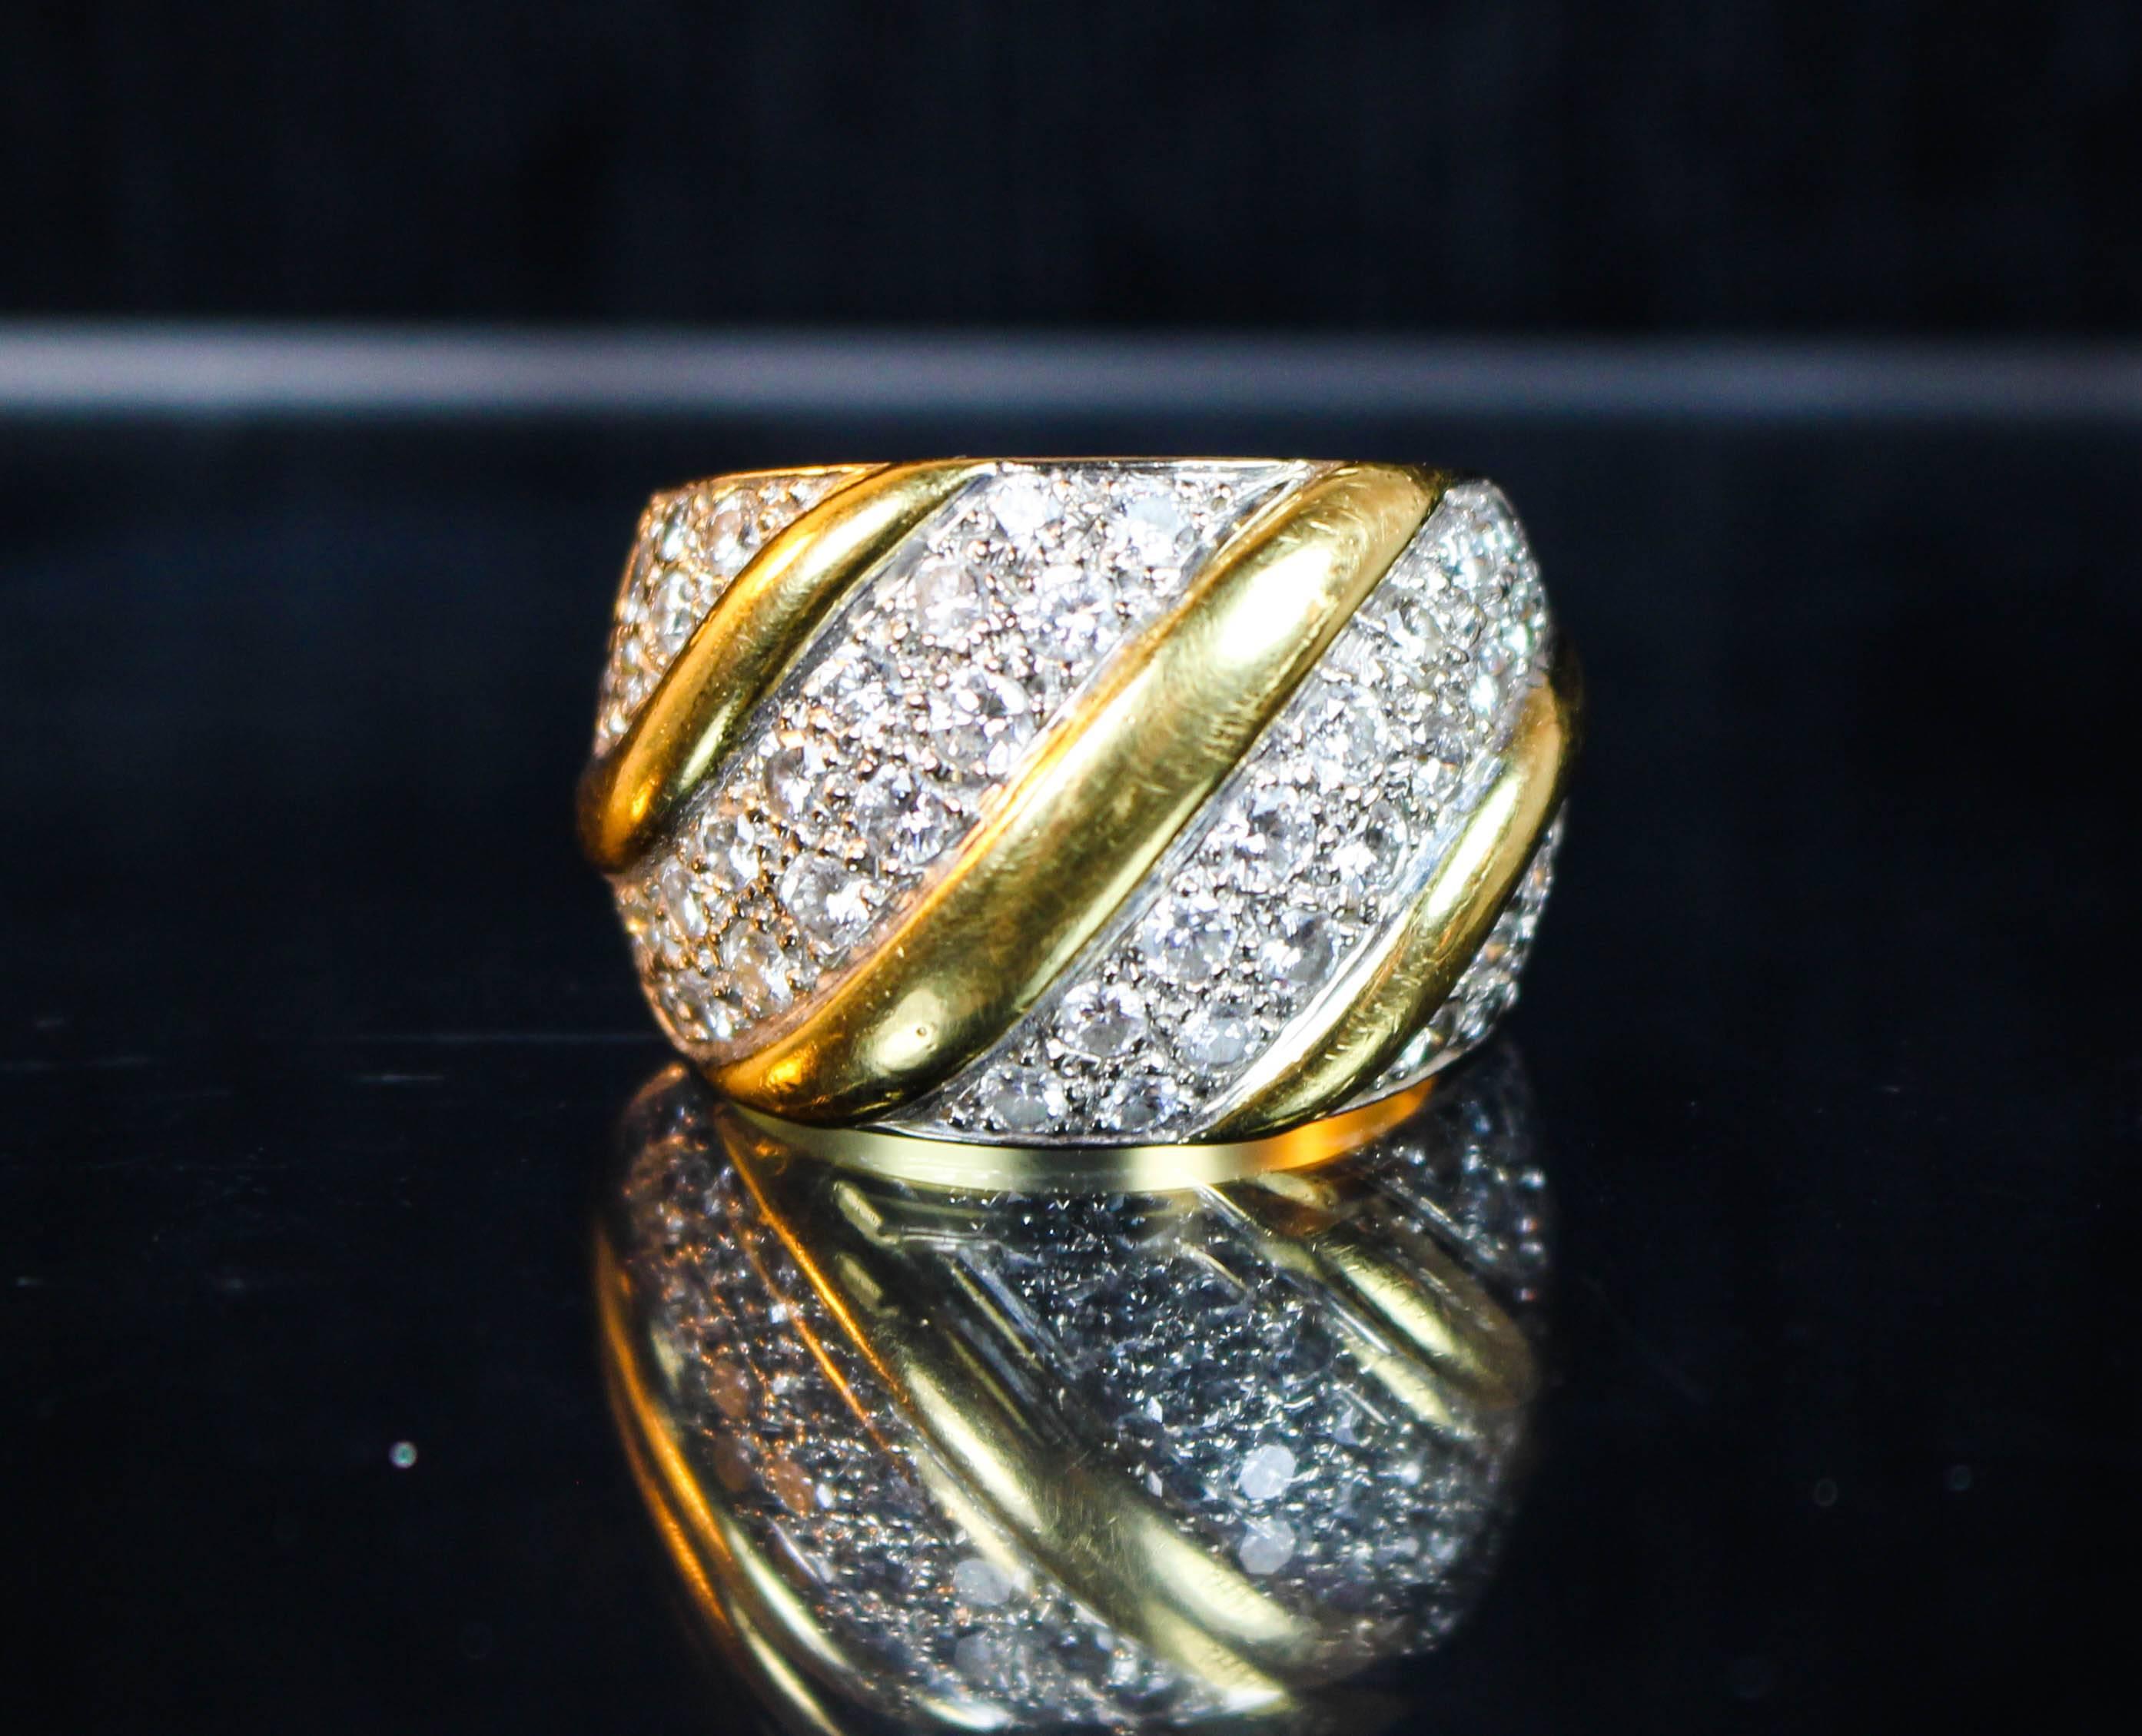 This ring is composed of yellow and white gold with pave cluster diamonds. 1980's Italian, stunning design. Specs below. In excellent condition.

Please feel free to ask any questions you may have, we are happy to assist. 

Specs:
18 KT White &